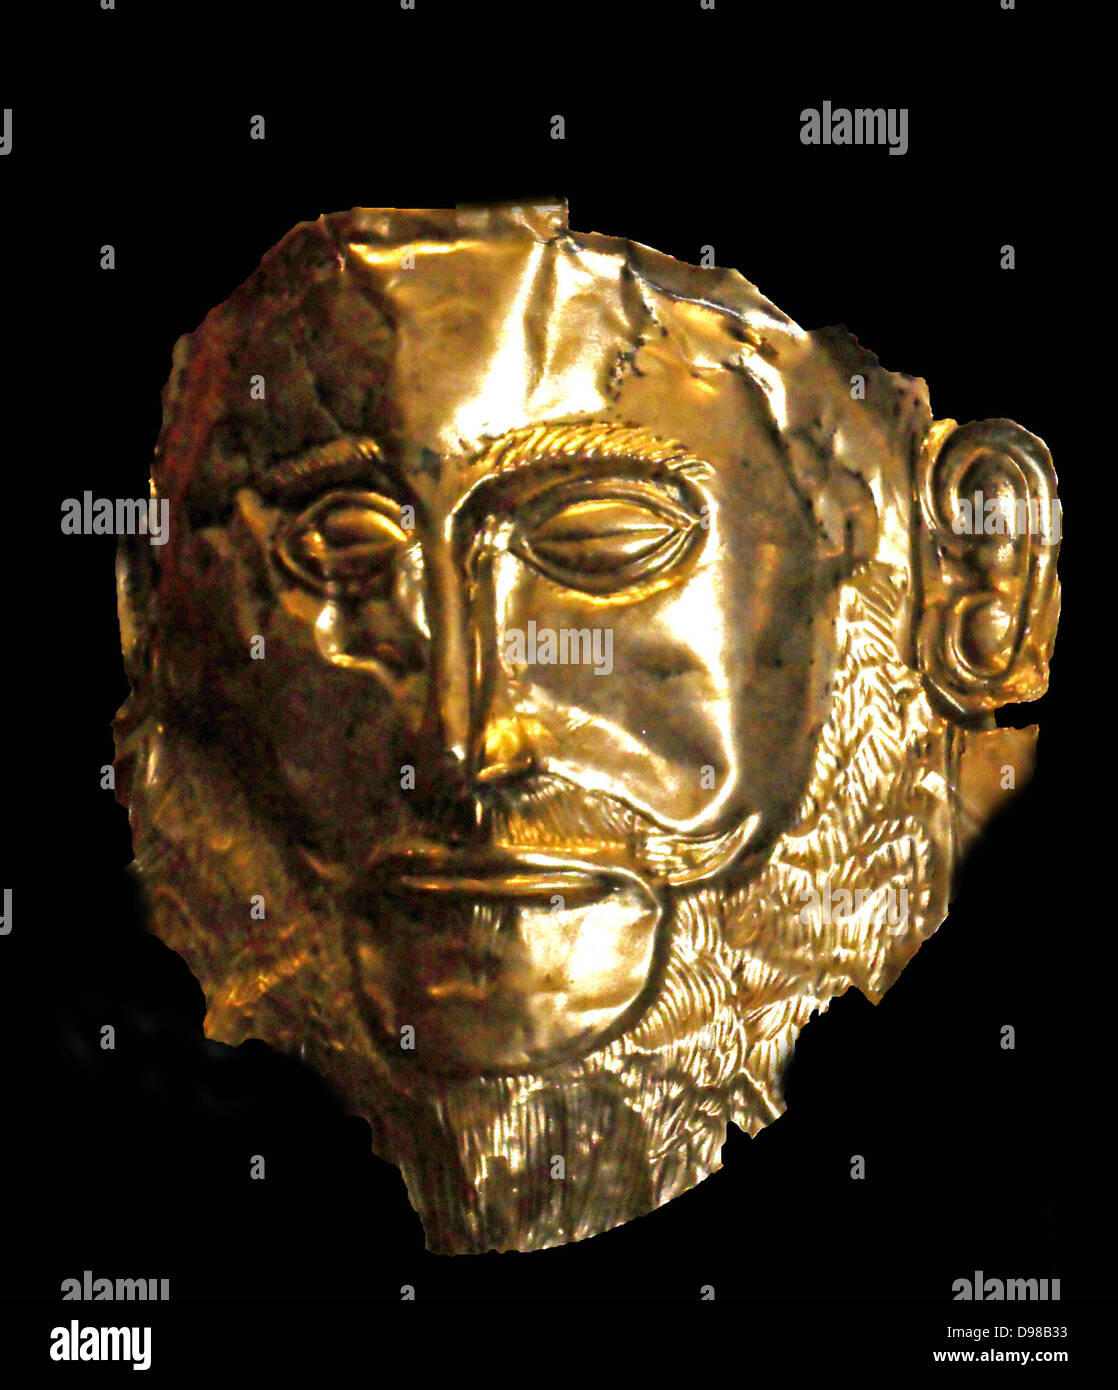 The Mask of Agamemnon is an artefact discovered at Mycenae in 1876 by Heinrich Schliemann. The mask is a gold funeral mask. Schliemann believed that he had discovered the body of the legendary Greek leader Agamemnon. today archaeological research suggests the mask is from 1550–1500 B.C.E Stock Photo